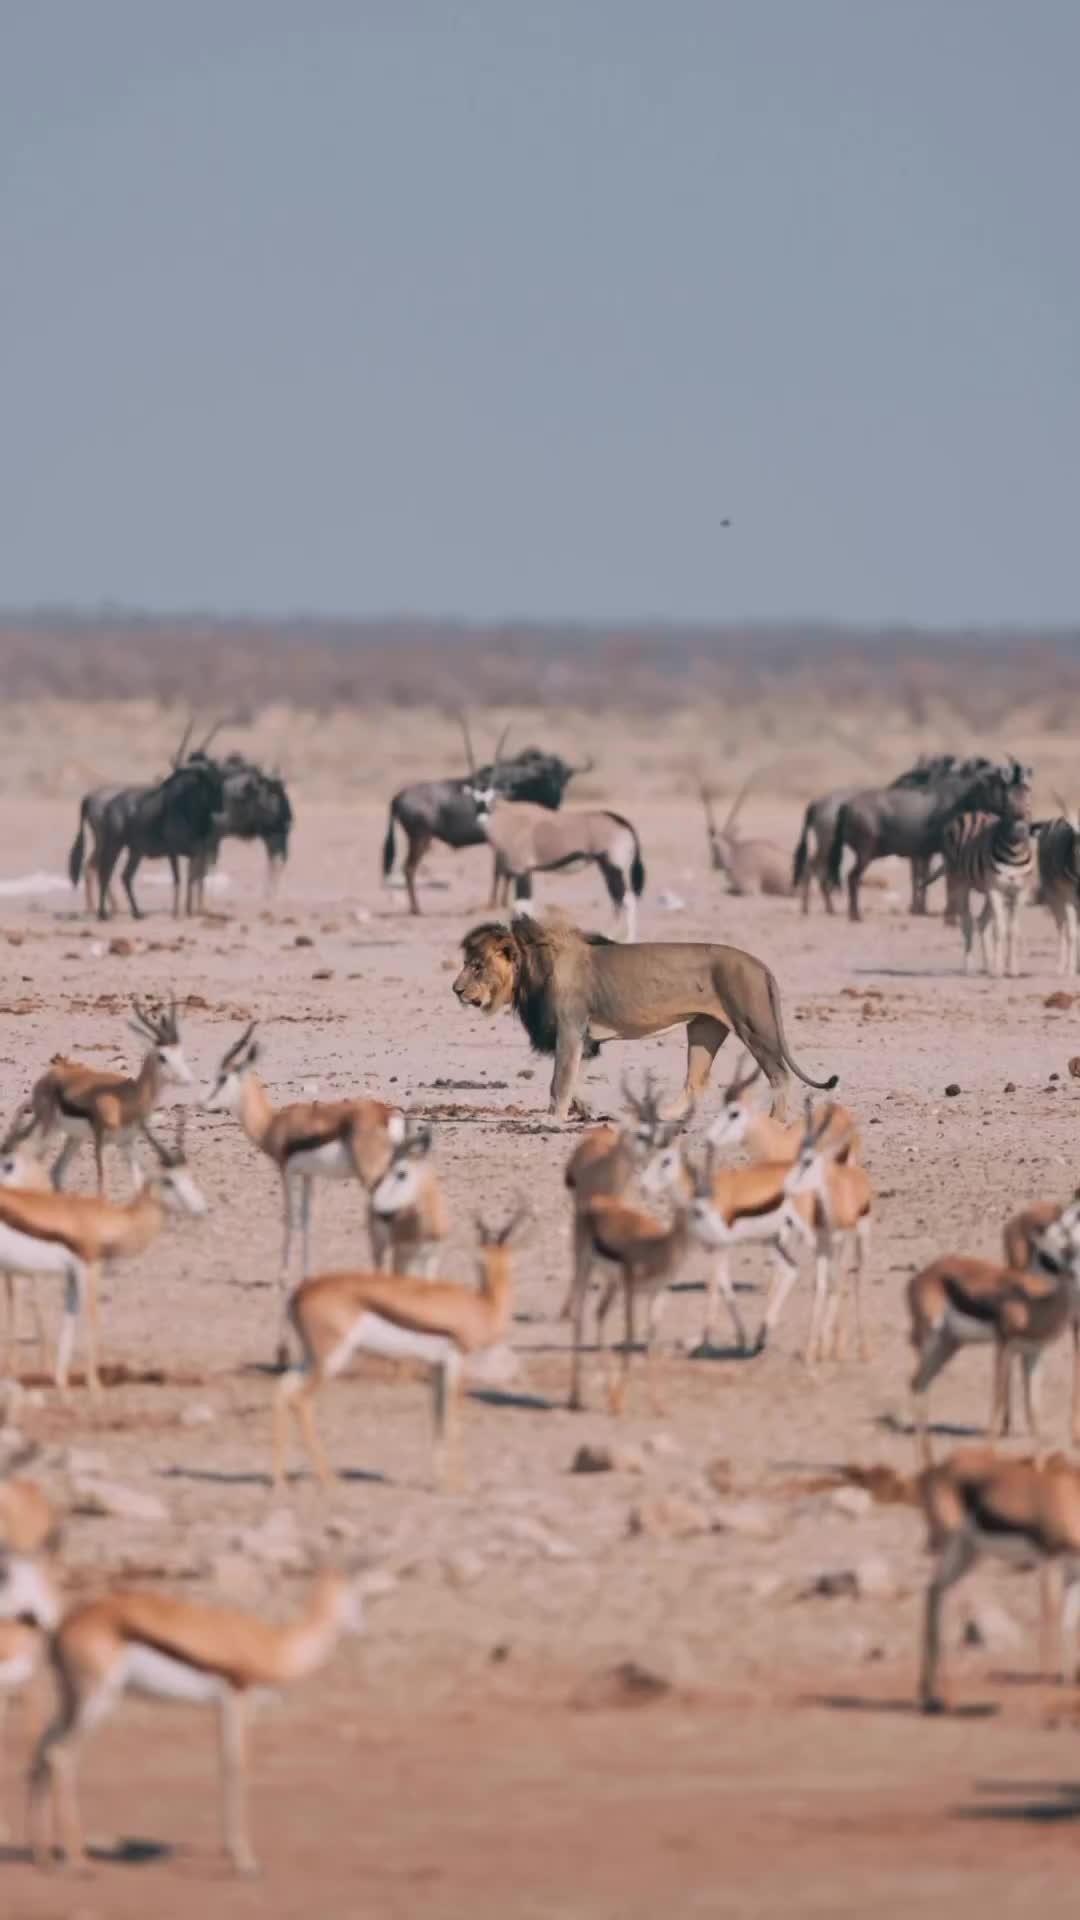 Namibia Safari: Land of the Big Cats in Krumneck